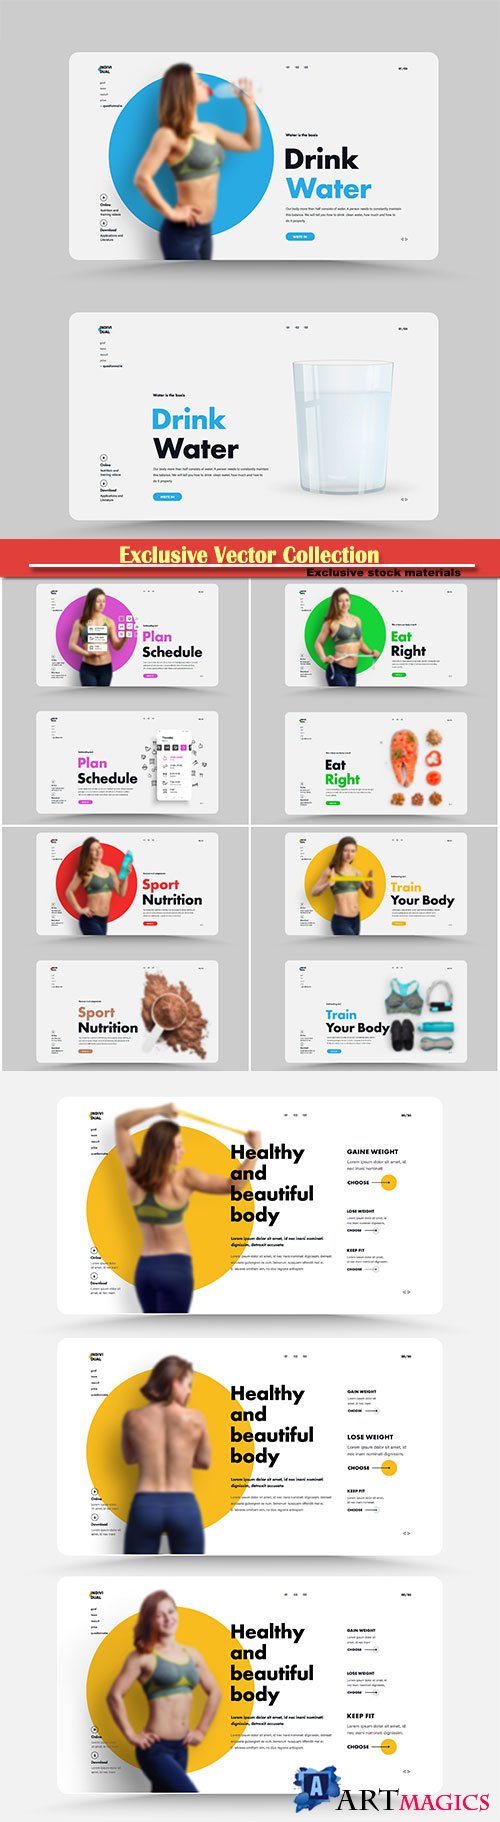 Design is the main page of the website for a sports trainer, nutritionist or gym